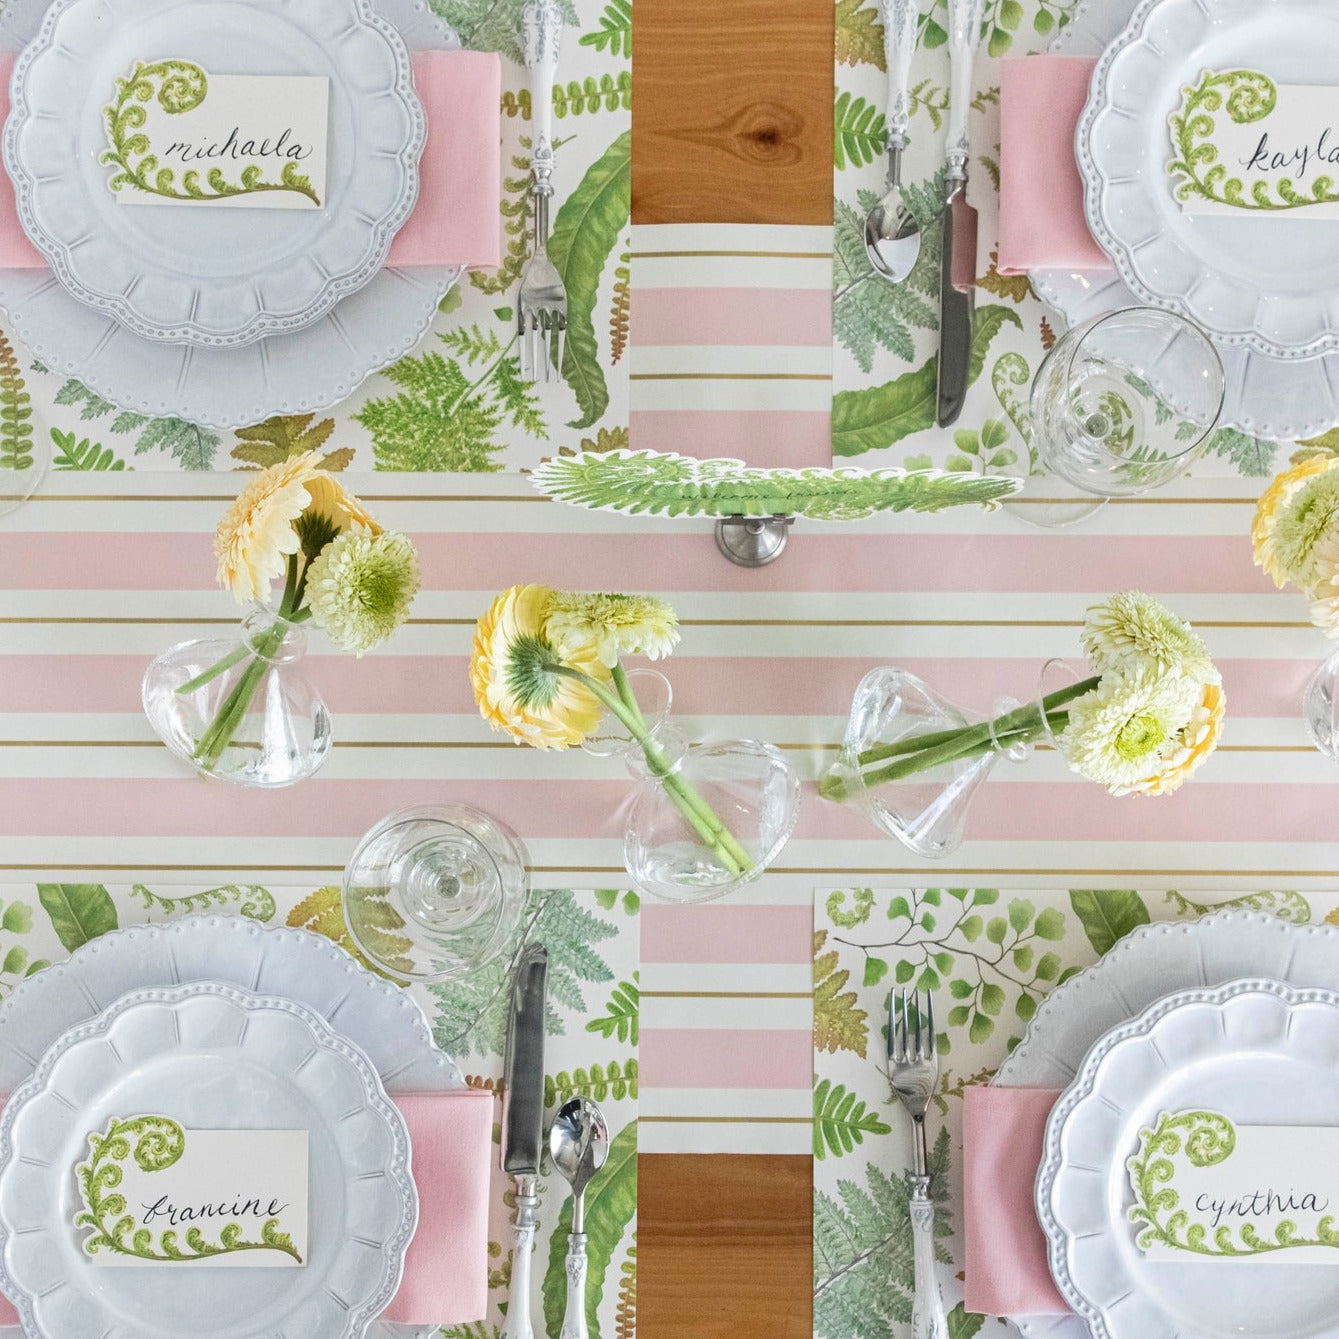 A table setting with pink and green plates and napkins, adorned with a Pink &amp; Gold Awning Stripe Runner from Hester &amp; Cook.